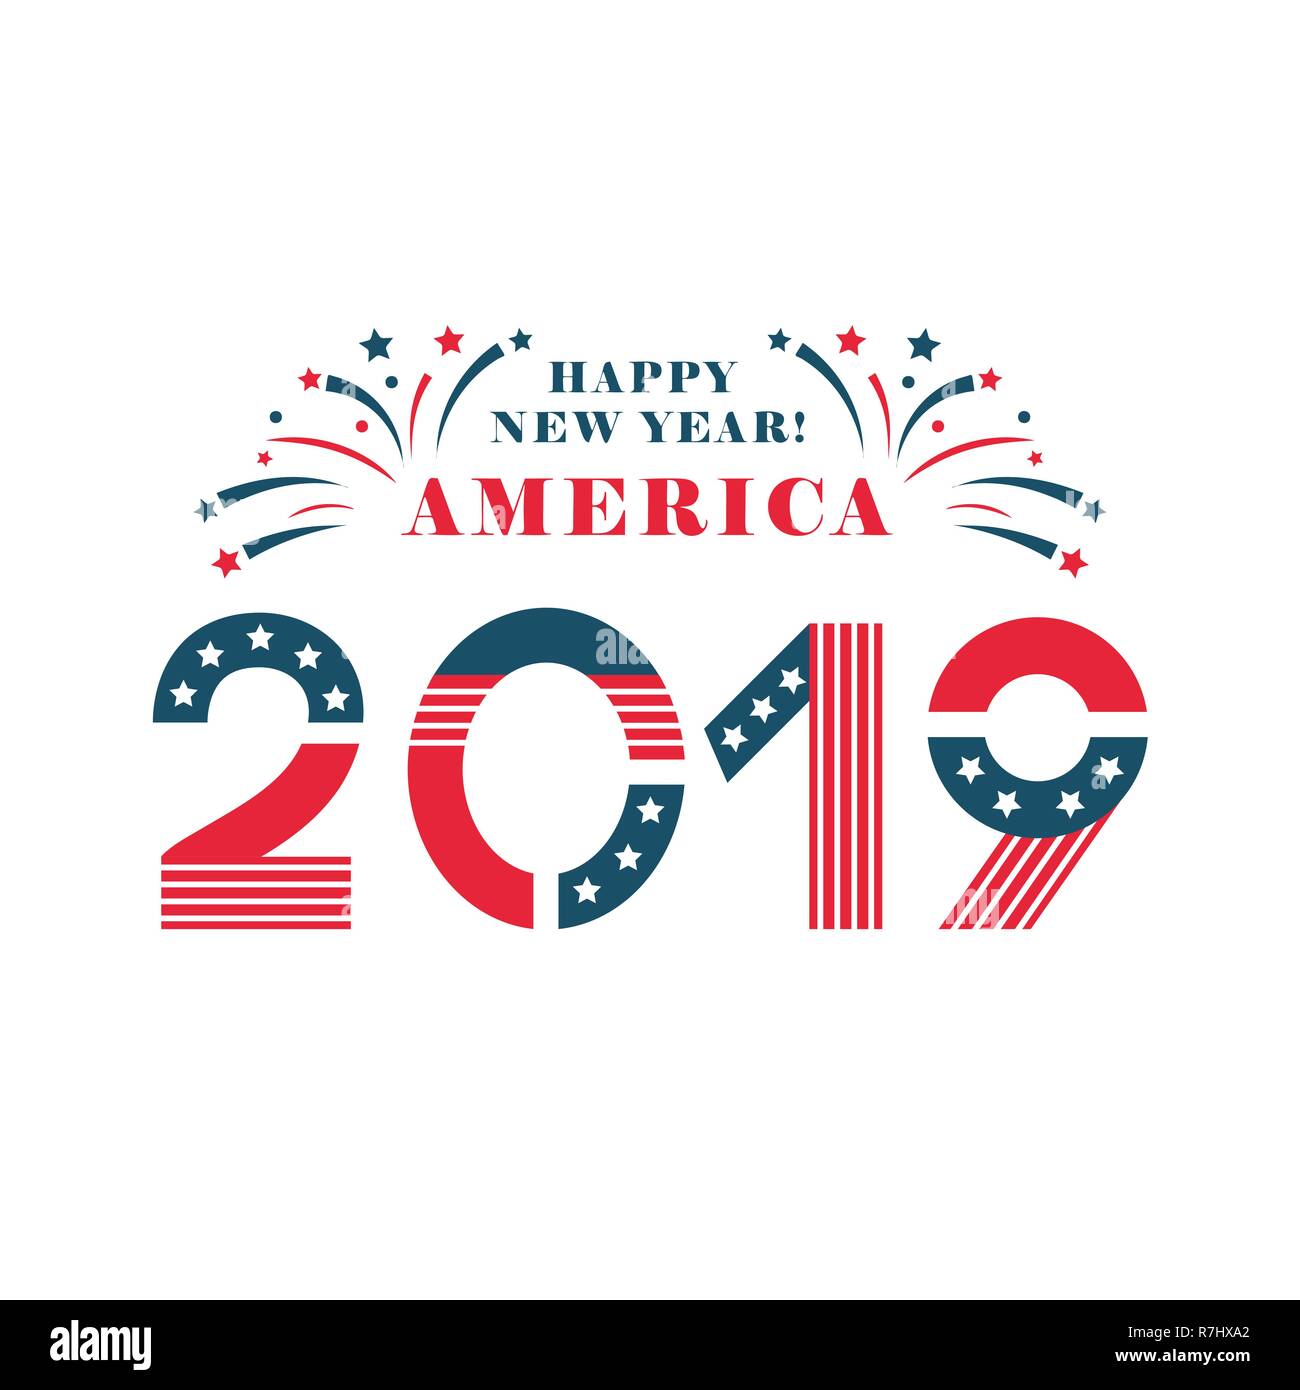 Happy New Year America. 2019 Letters in national flag design Stock Vector